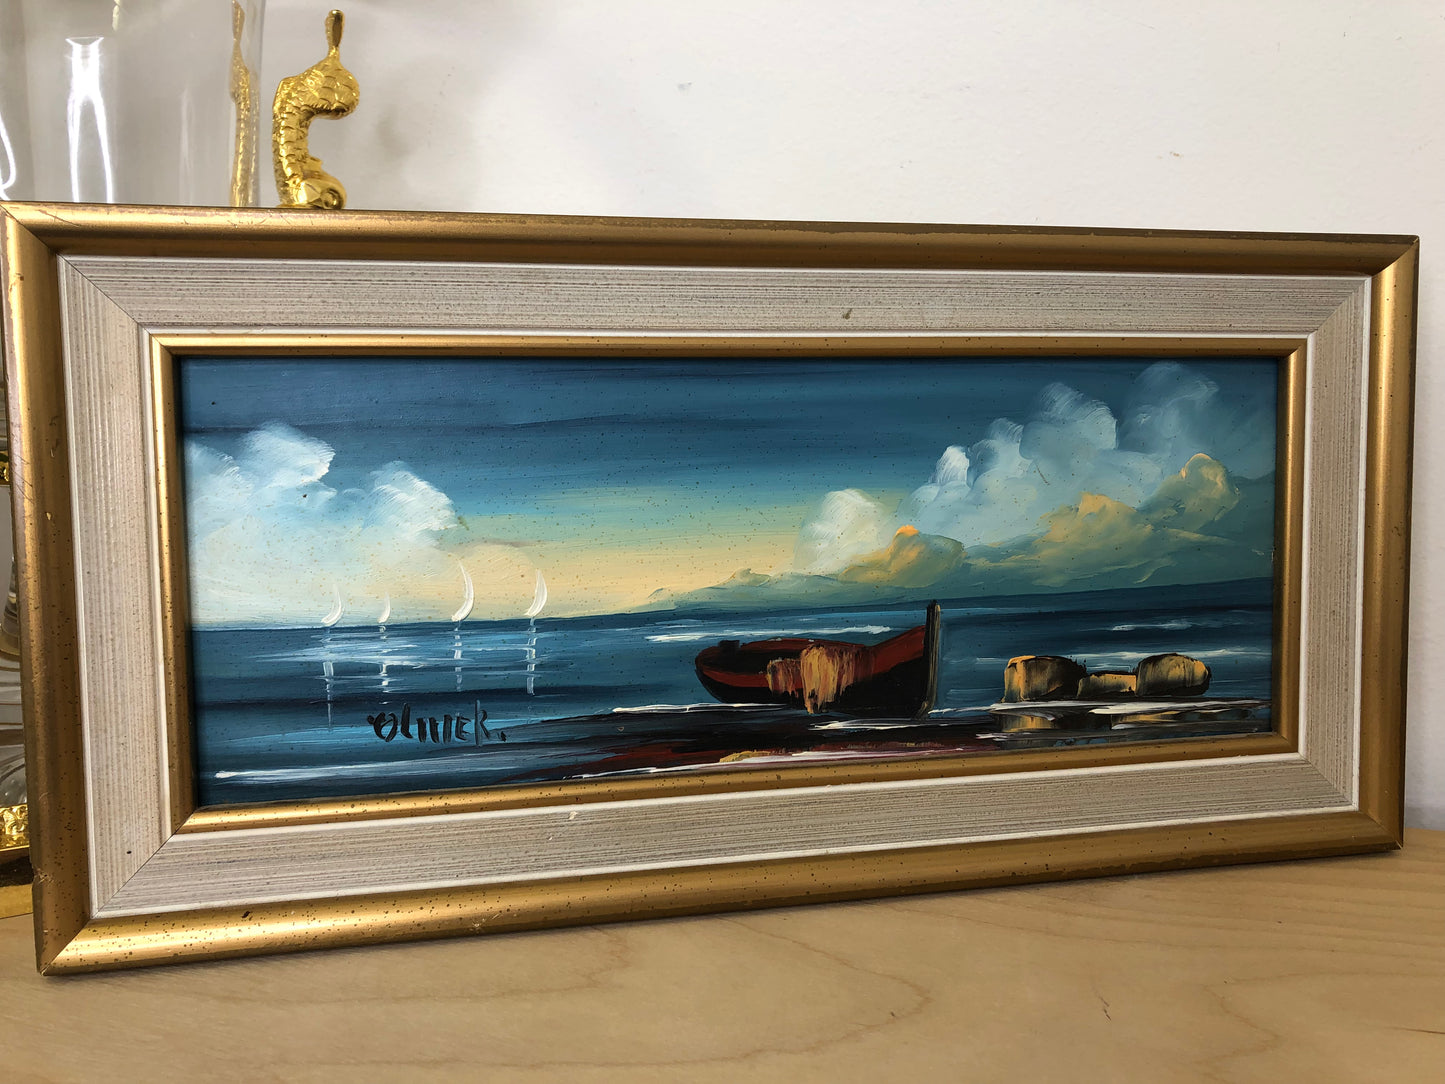 Vintage Original Art with boat and vivid blues